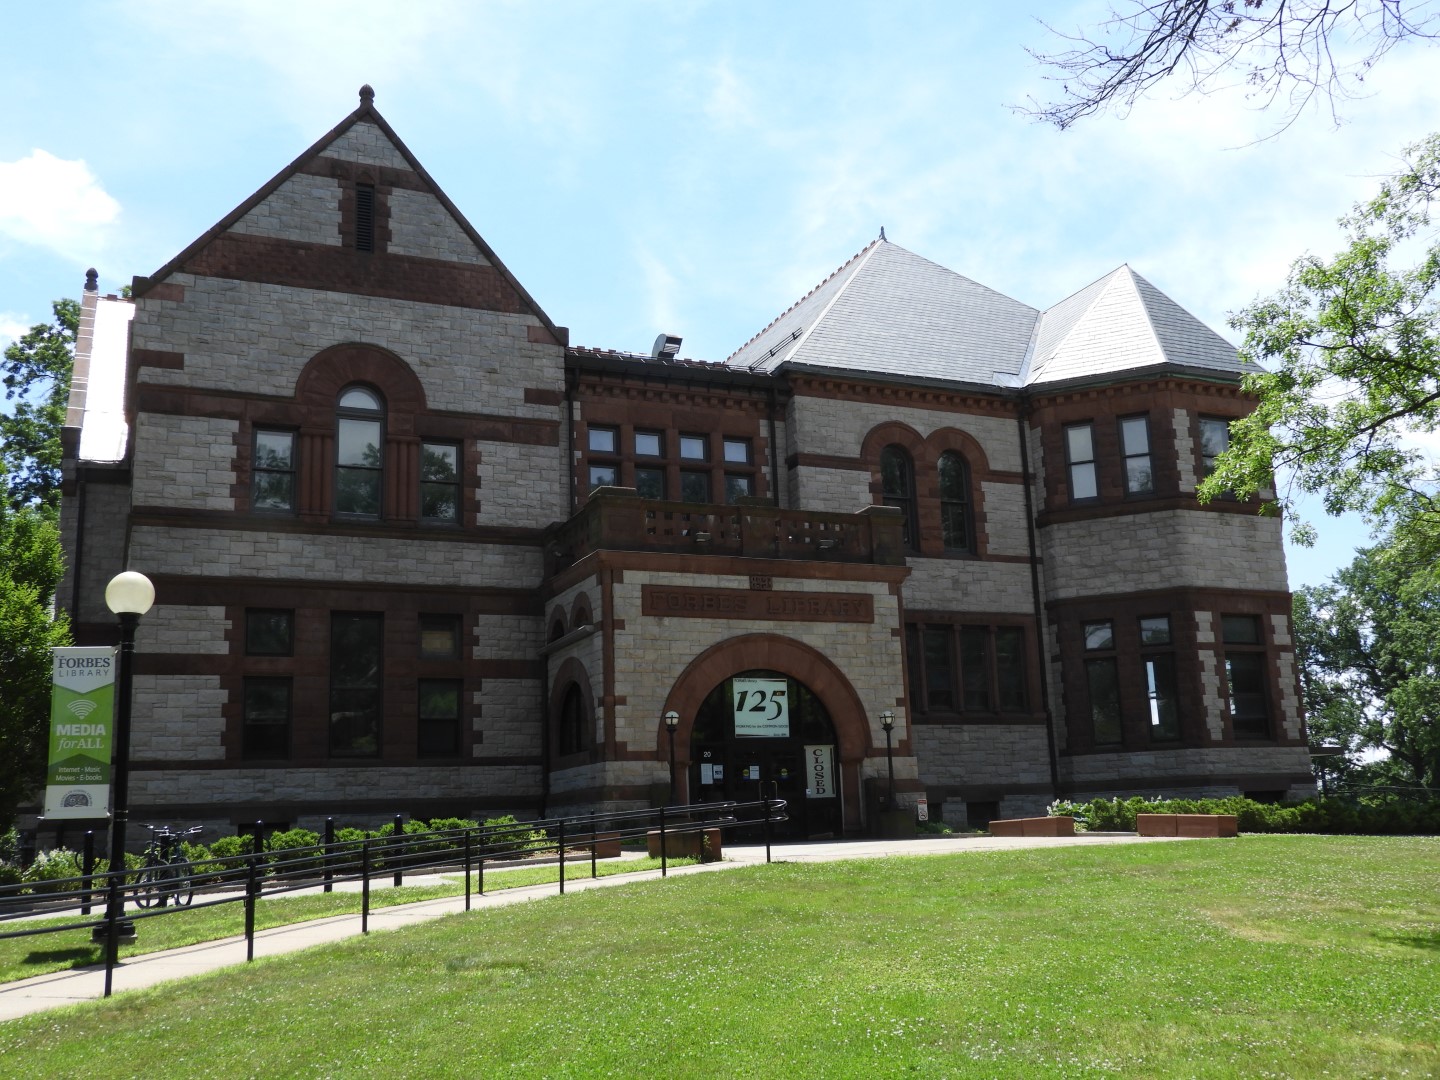 Calvin Coolidge library and museum  1 of 1 (#coolidge_library_museum_northampton_ma)